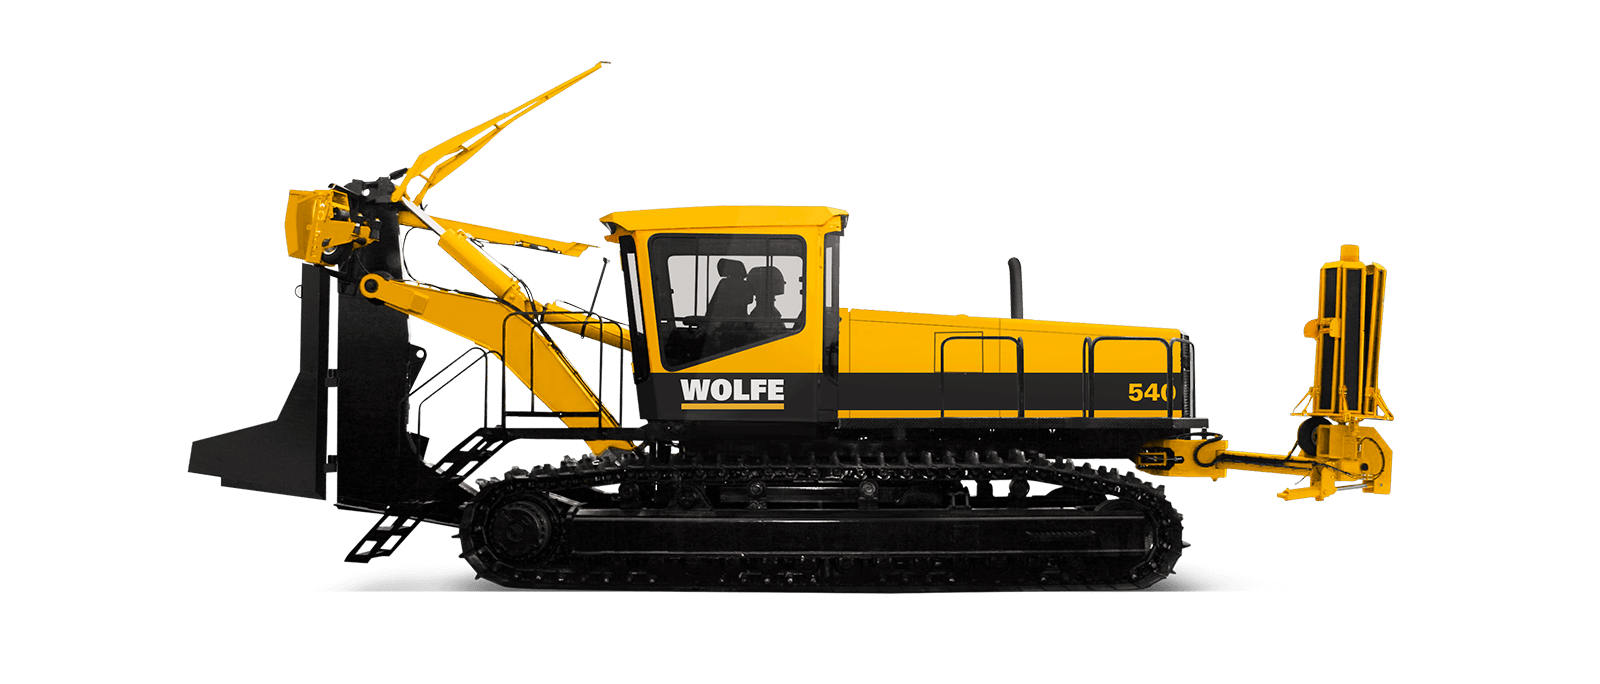 Heavy equipment, Construction Plow, Single Arm Plows, high-quality equipment, Toughest conditions, Proven performance